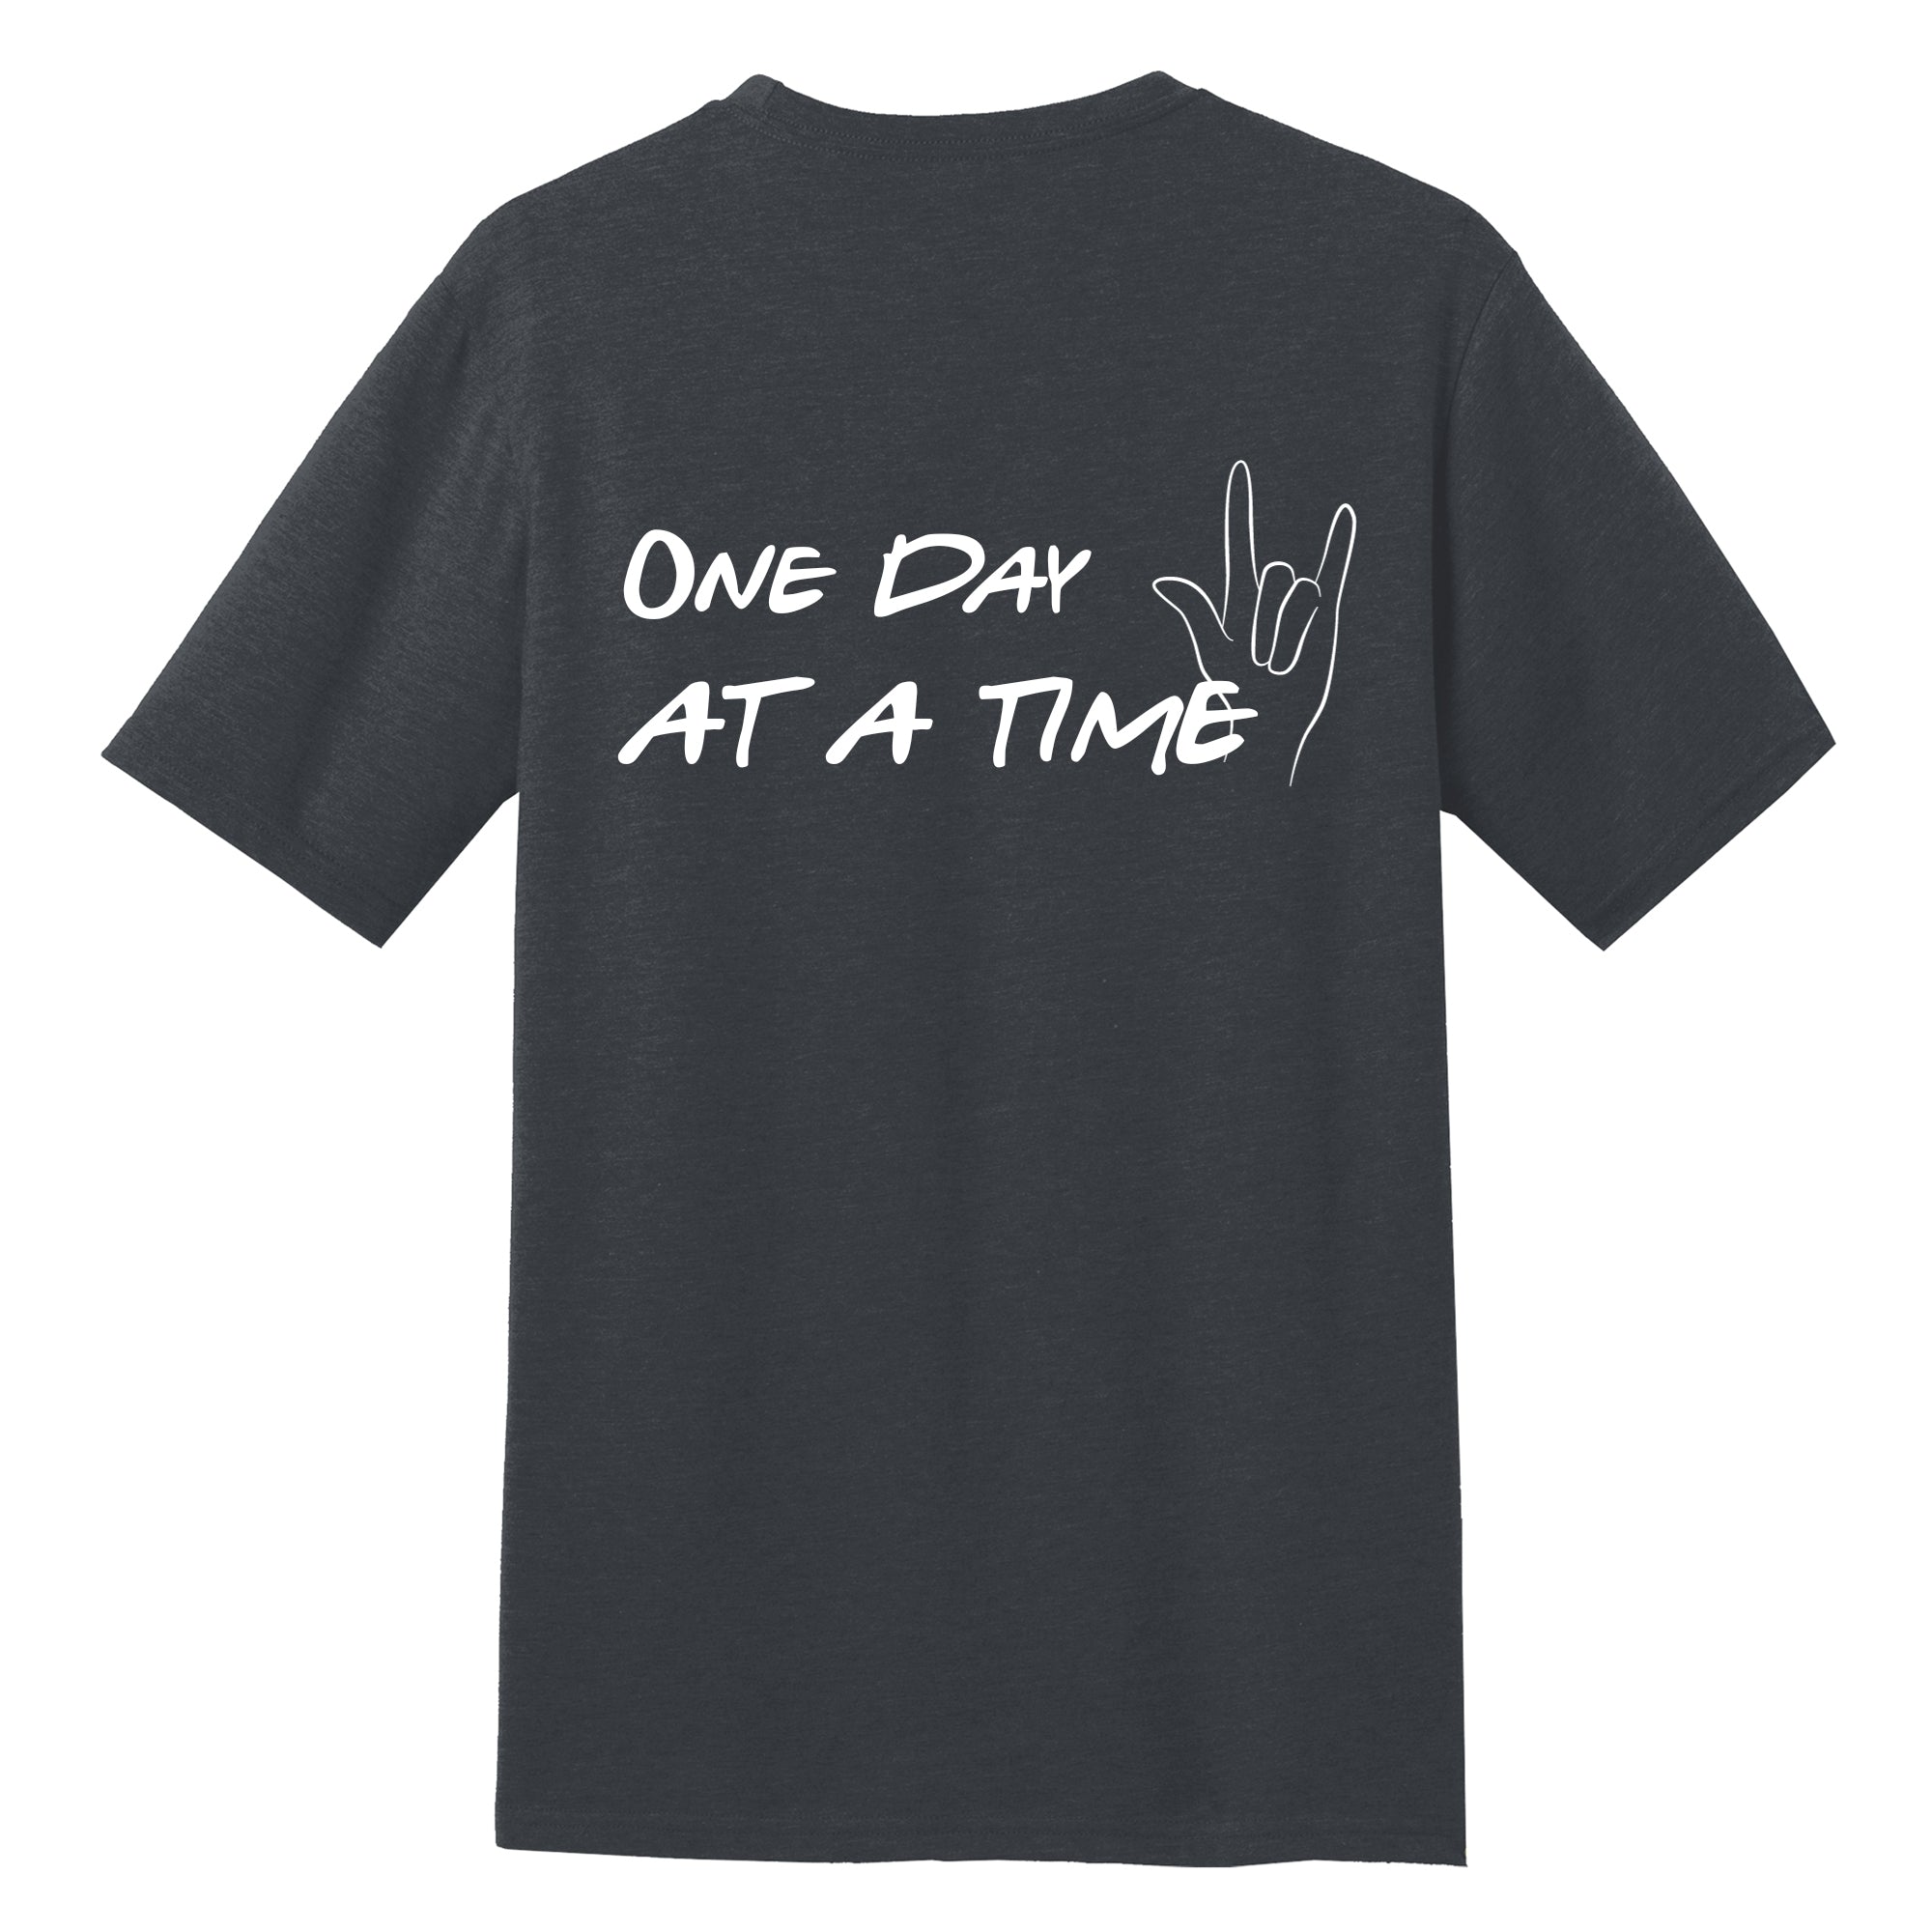 "One Day At A Time" T-Shirt- Benefitting the National Eating Disorder Association